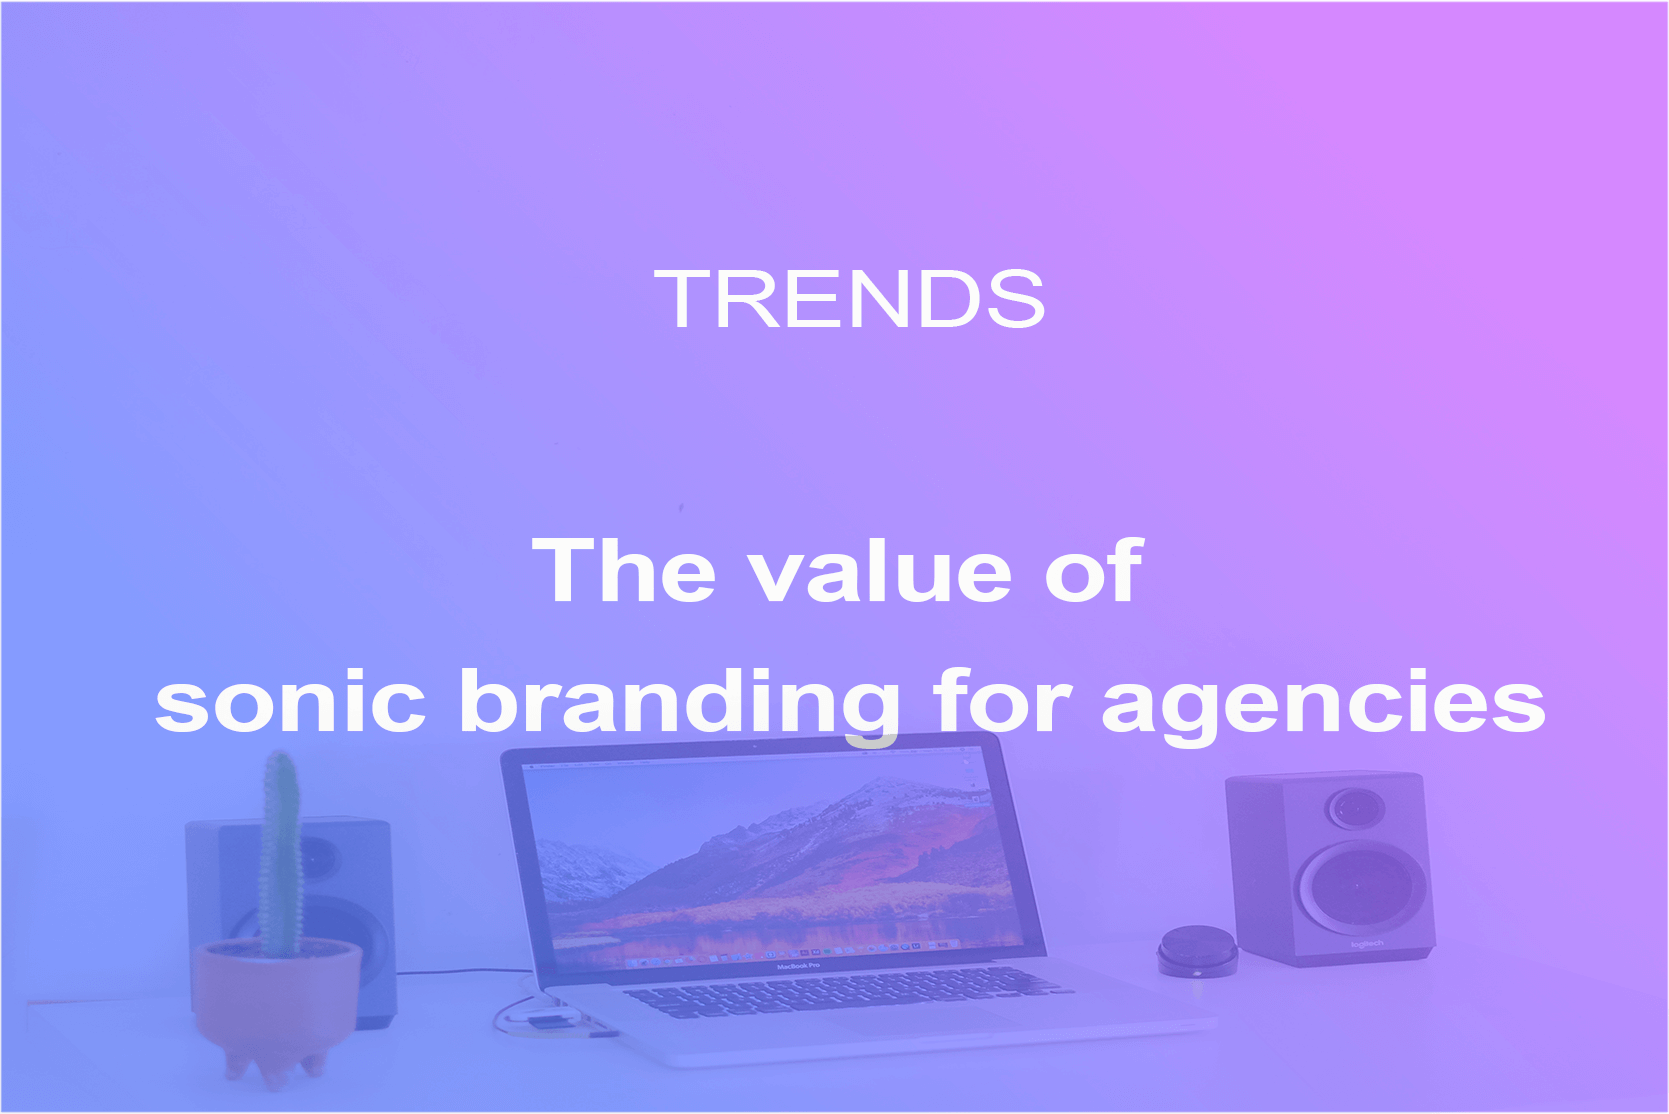 The value of audio branding for agencies.